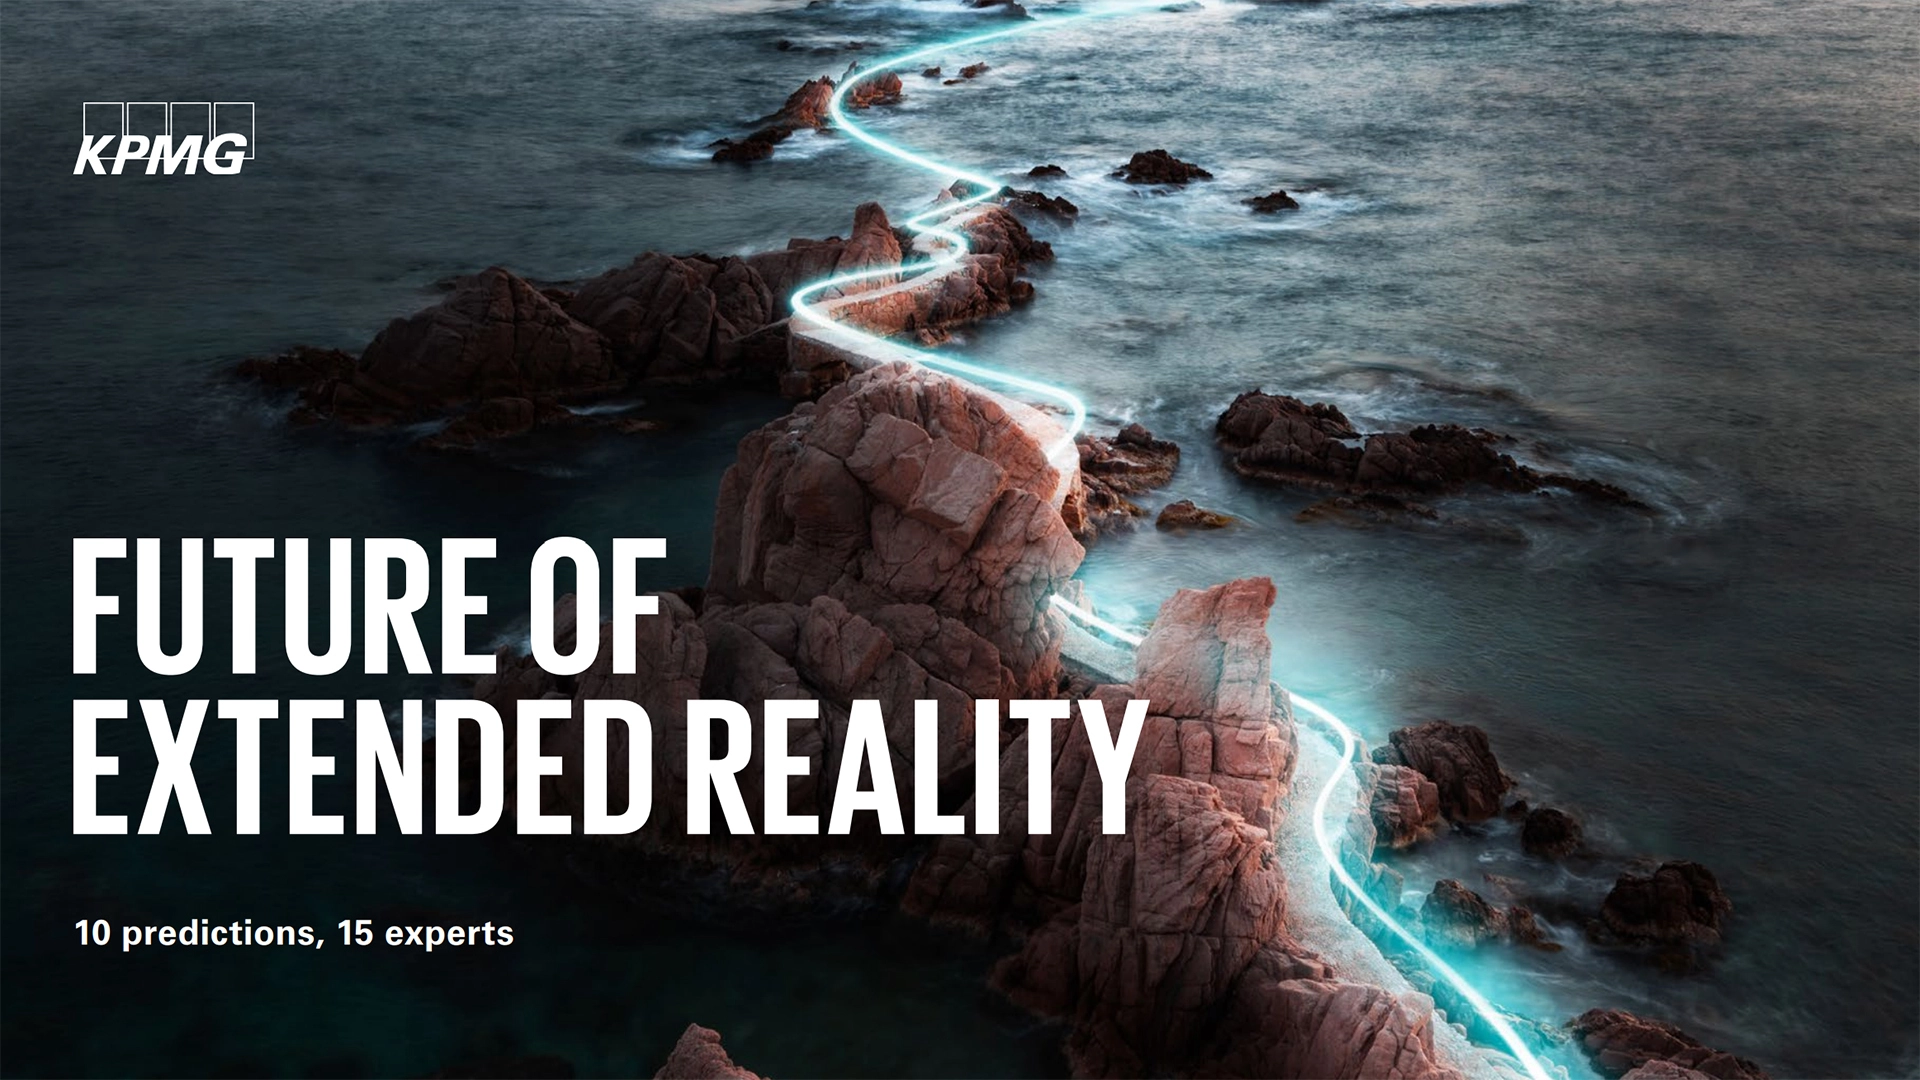 Whitepaper KPMG: “The future of Metaverse and Extended Reality”